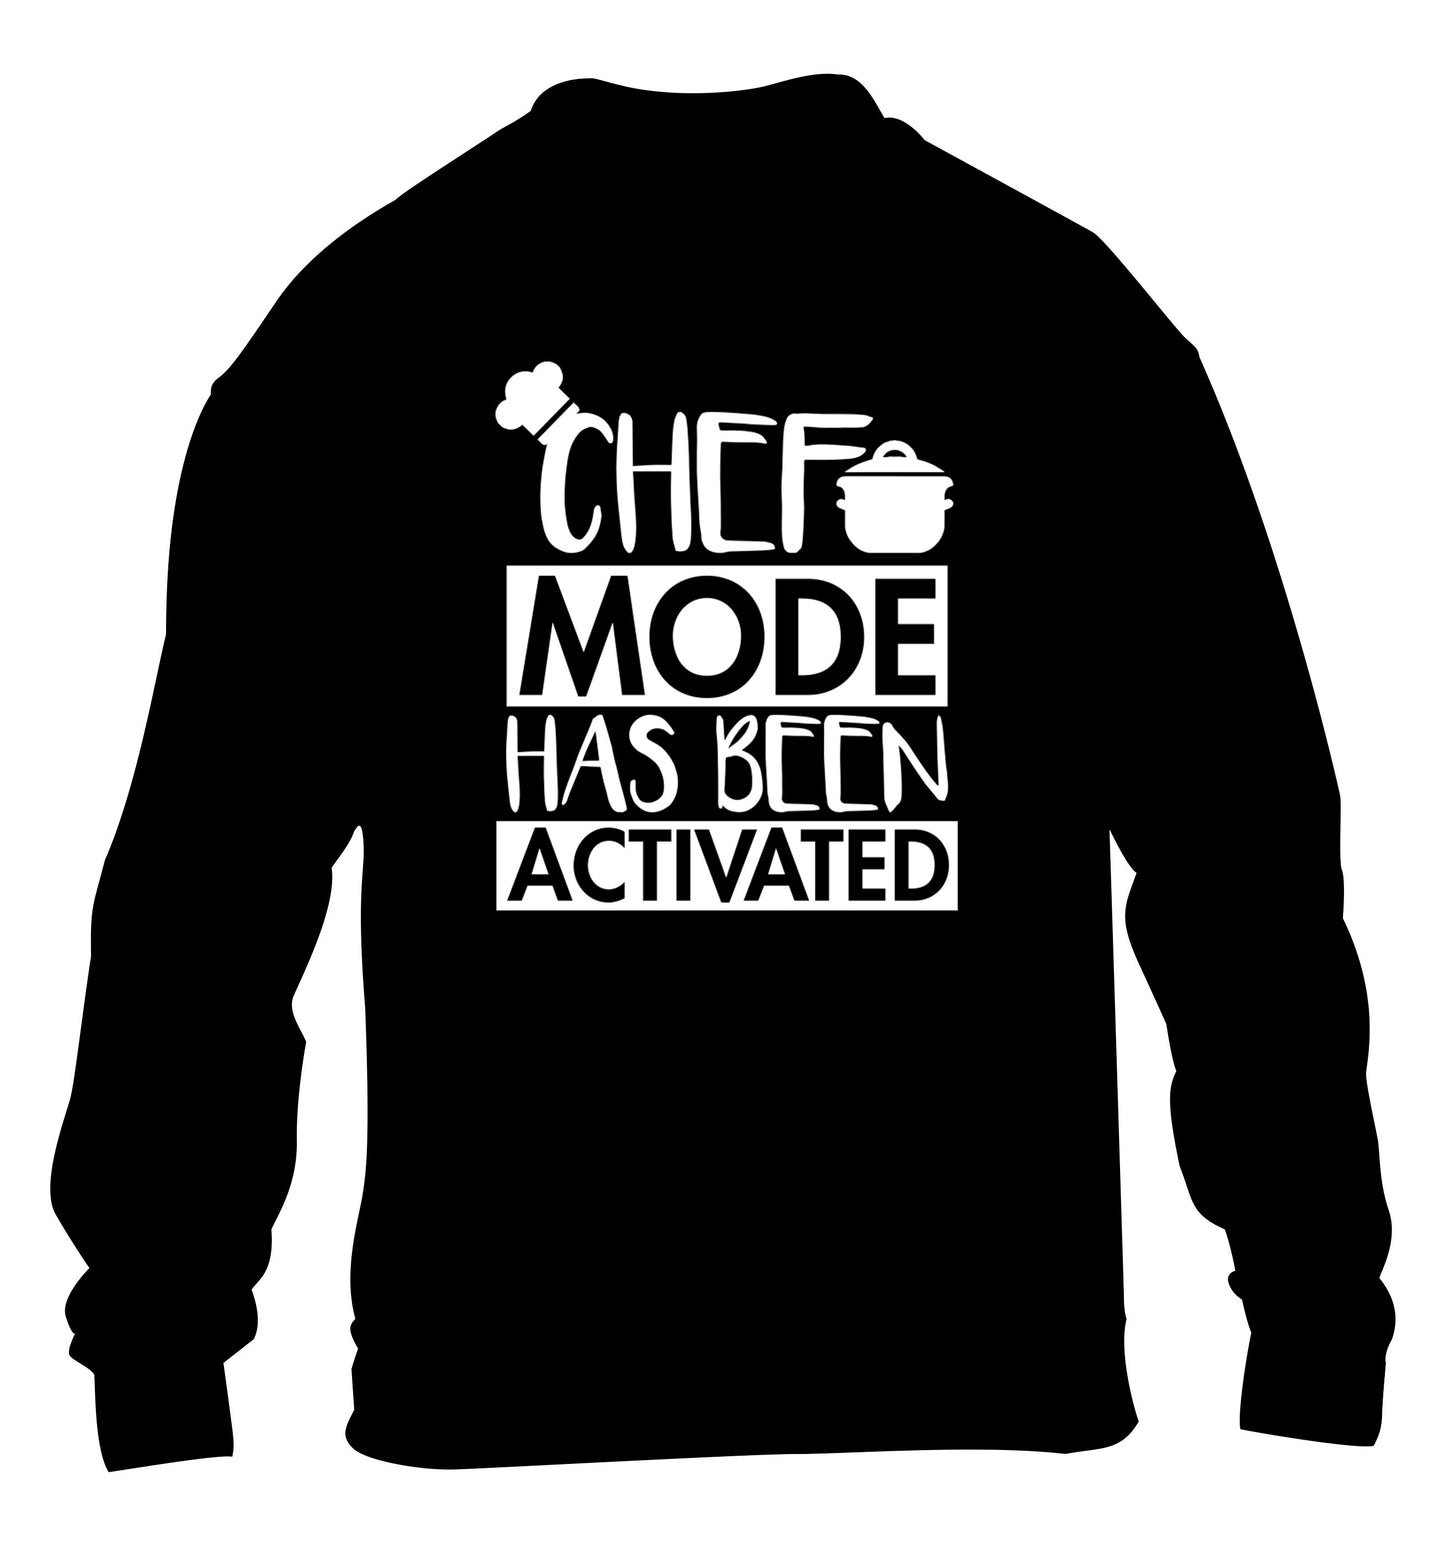 Chef mode has been activated children's black sweater 12-14 Years